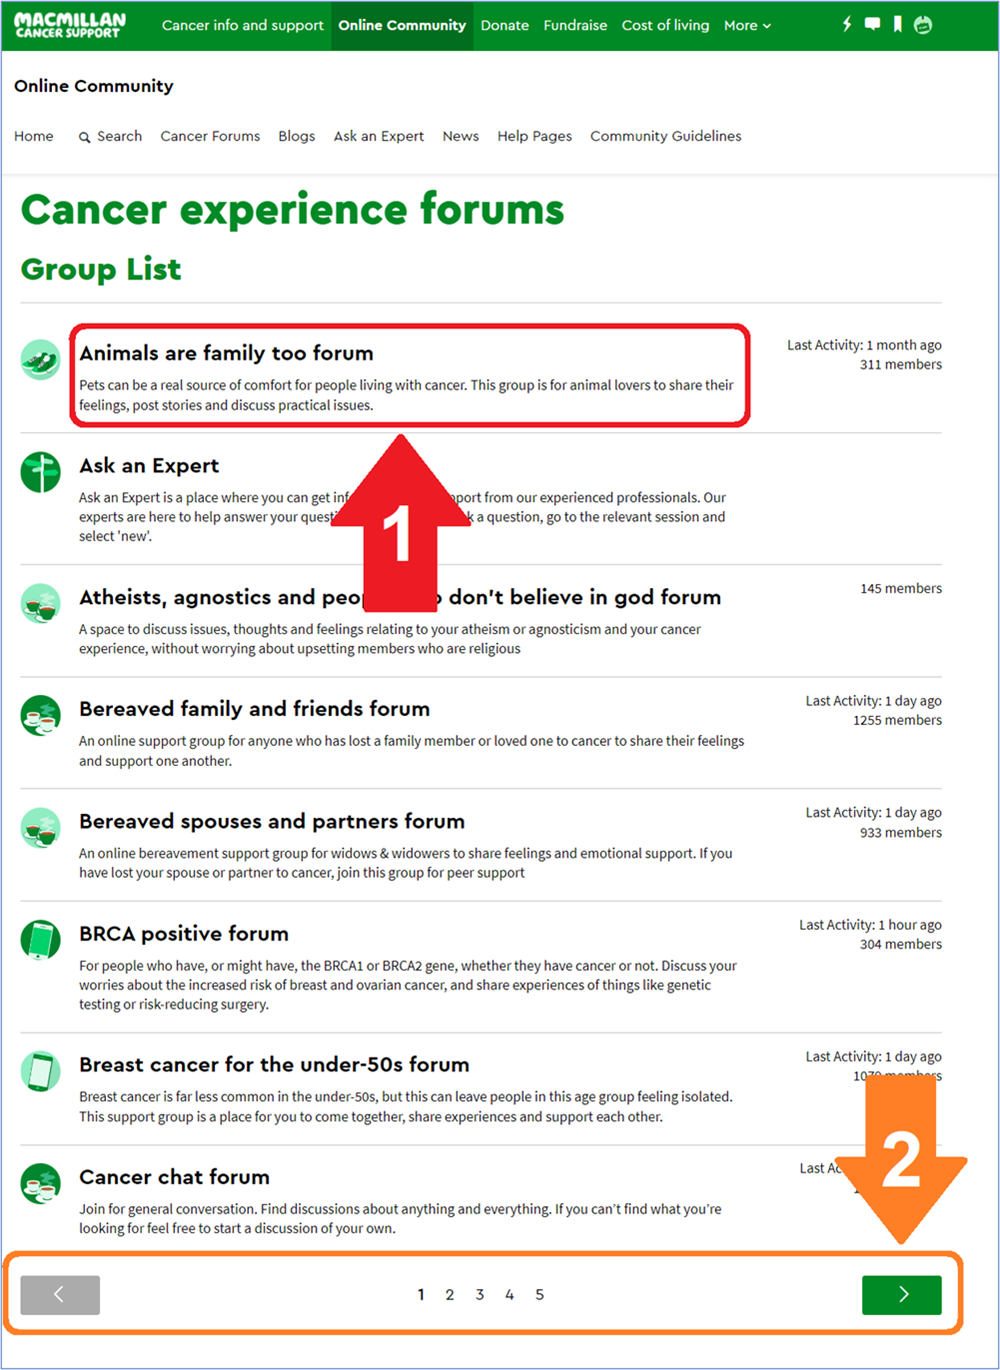 The Cancer experience forums Group List with various forum group titles and navigation buttons highlighted